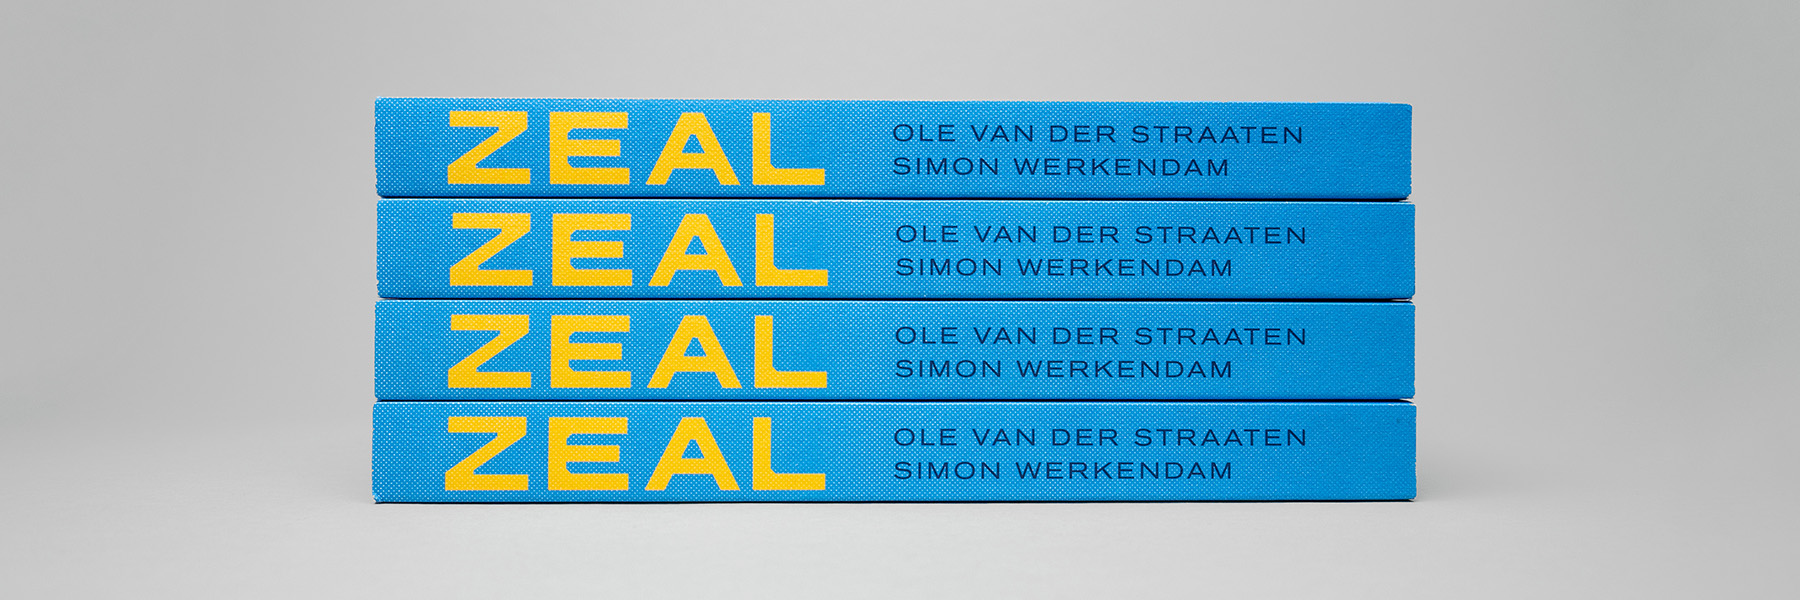 Work_and_Dam-ZEAL-book_spine-01.1